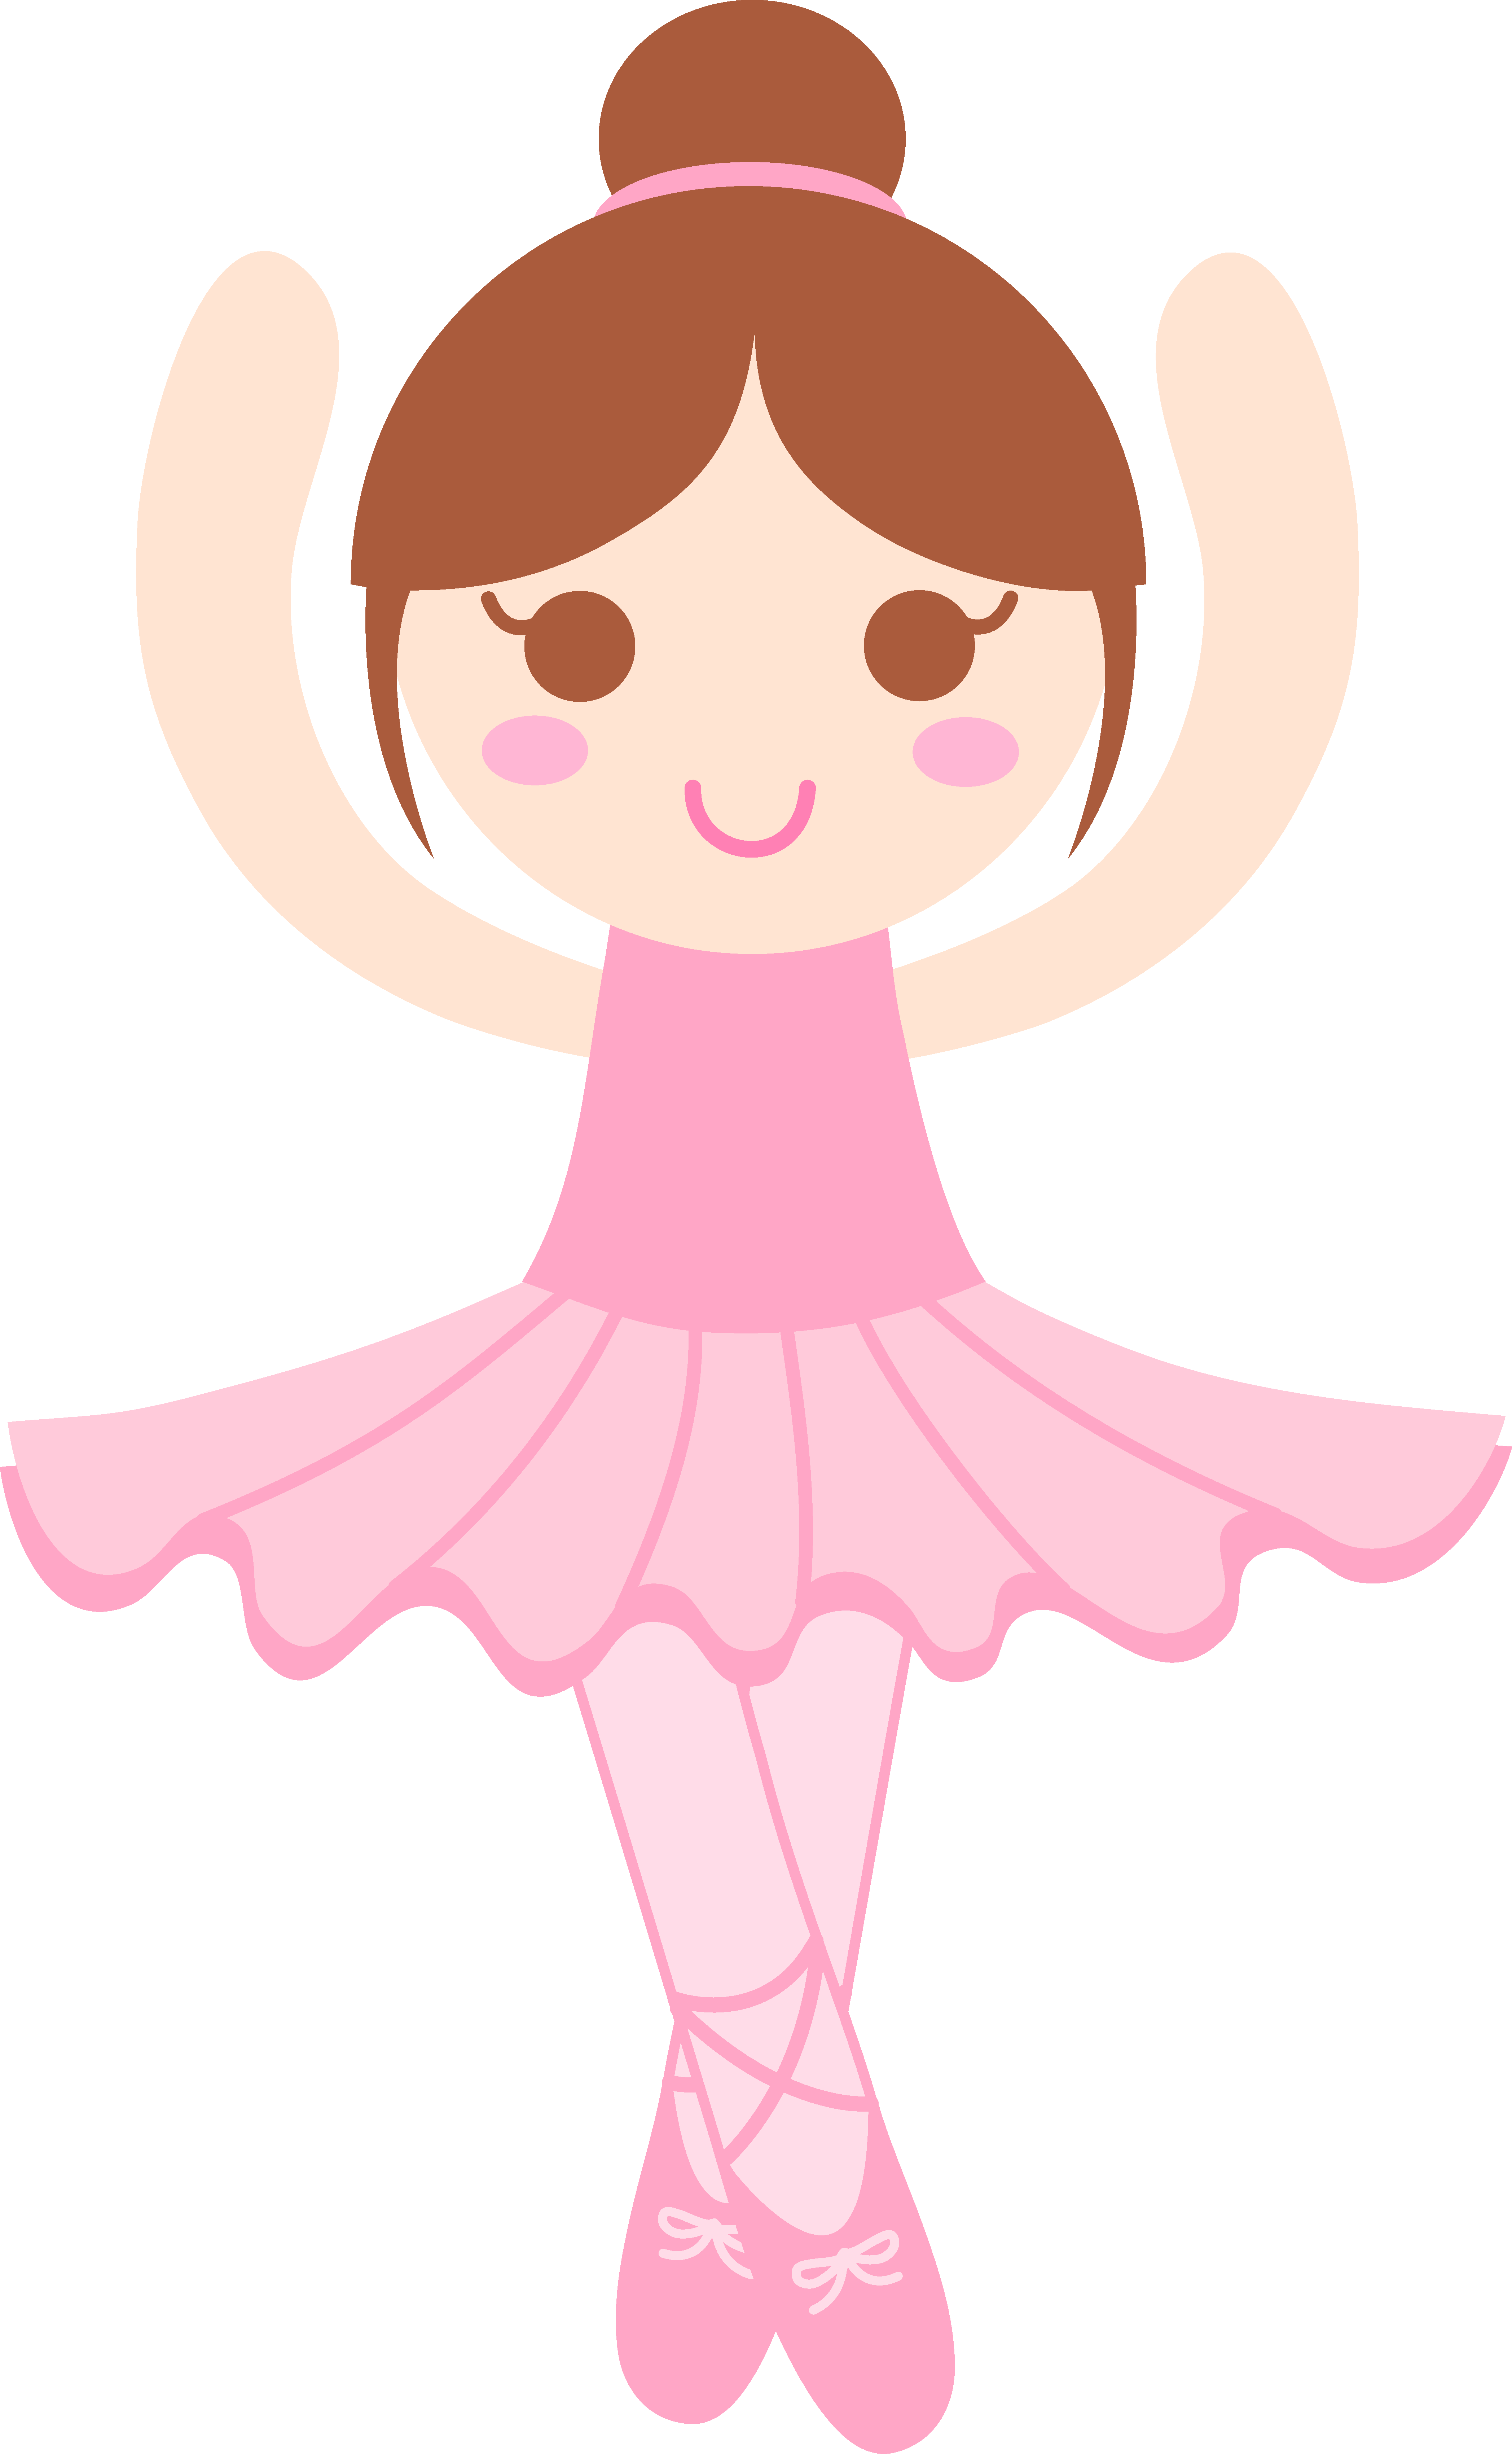 baby girl clipart free download - photo #14